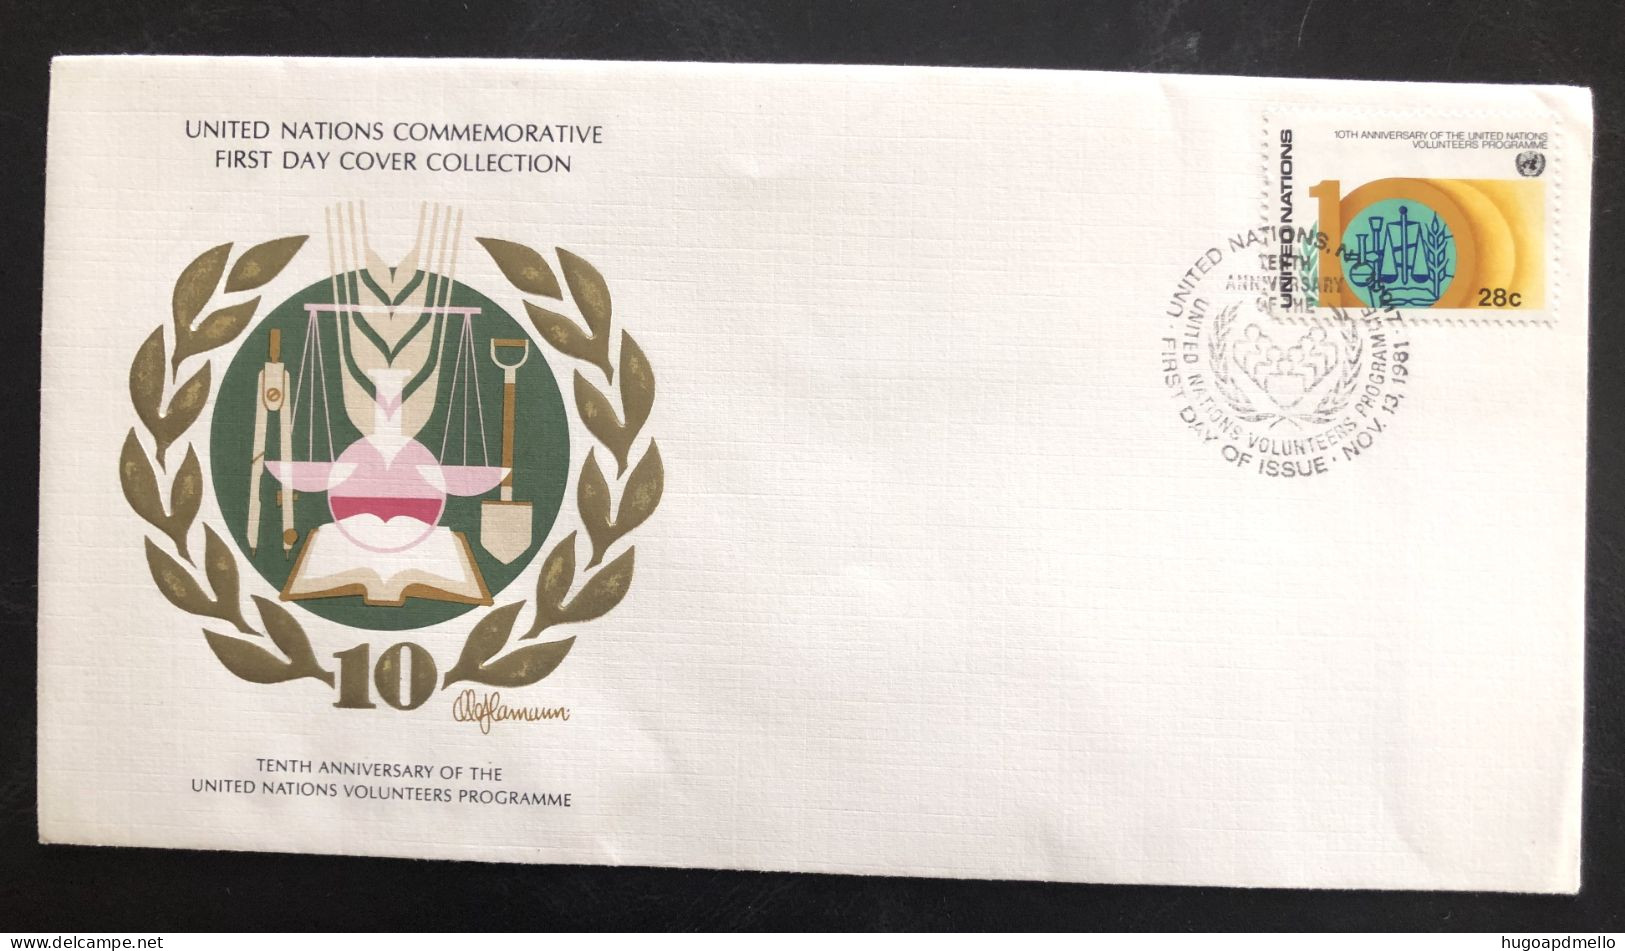 UNITED NATIONS, Uncirculated FDC « TENTH ANNIVERSARY OF THE UNITED NATIONS VOLUNTEERS PROGRAMME », 1981 - UNO